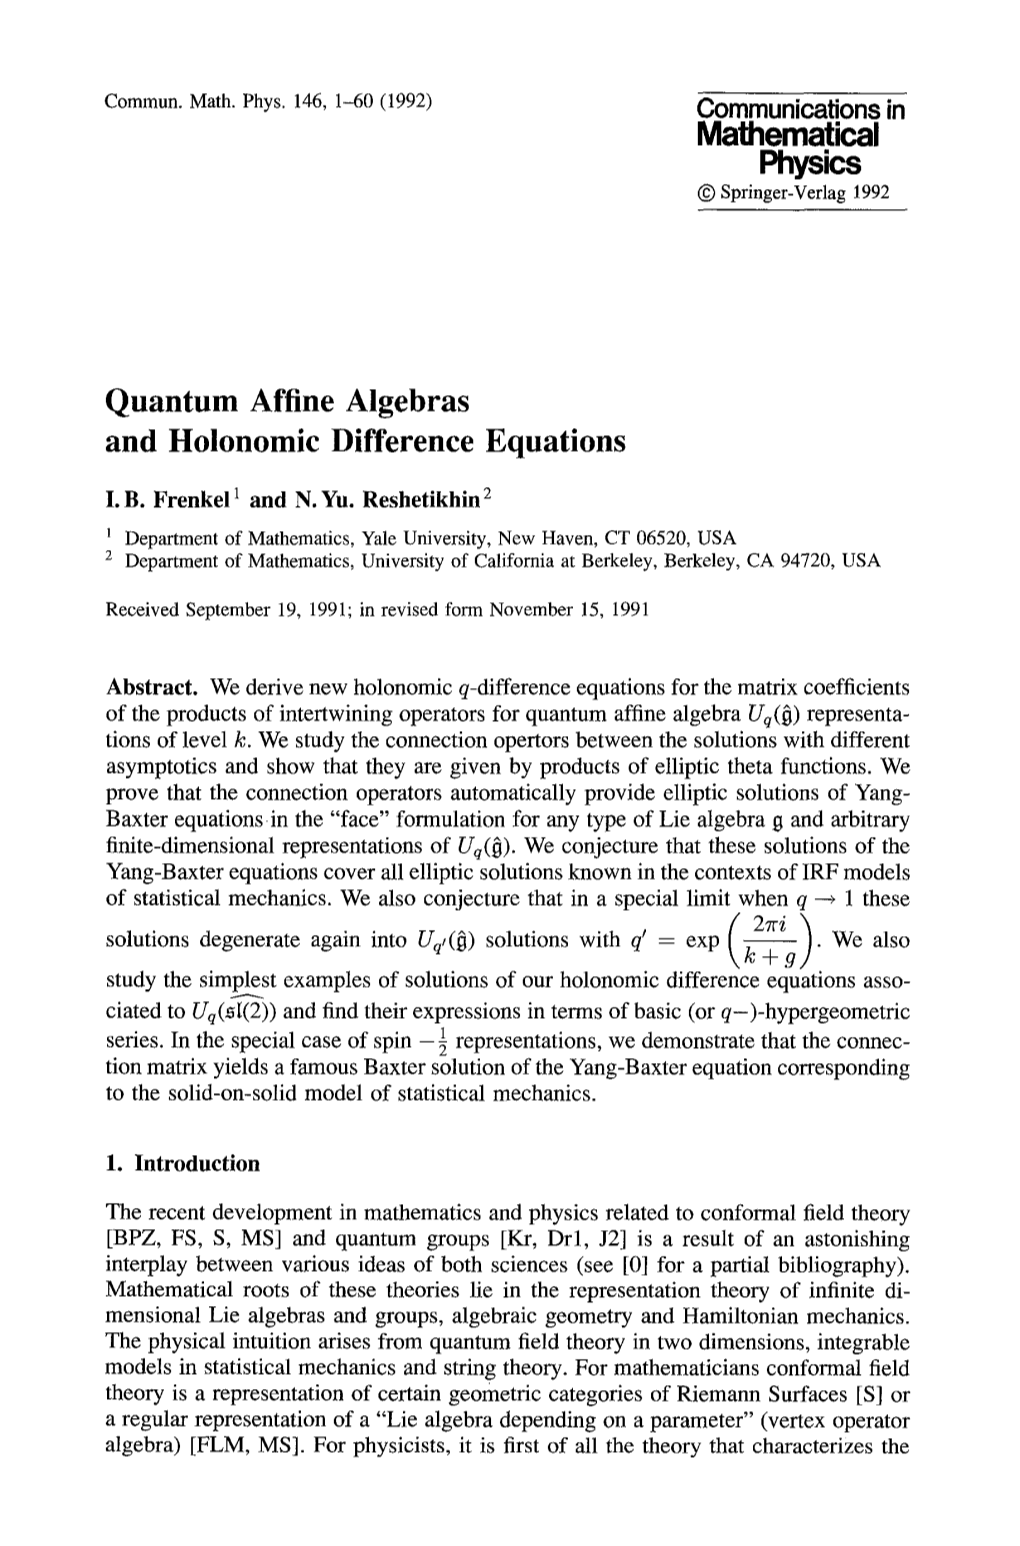 Quantum Affine Algebras and Holonomic Difference Equations